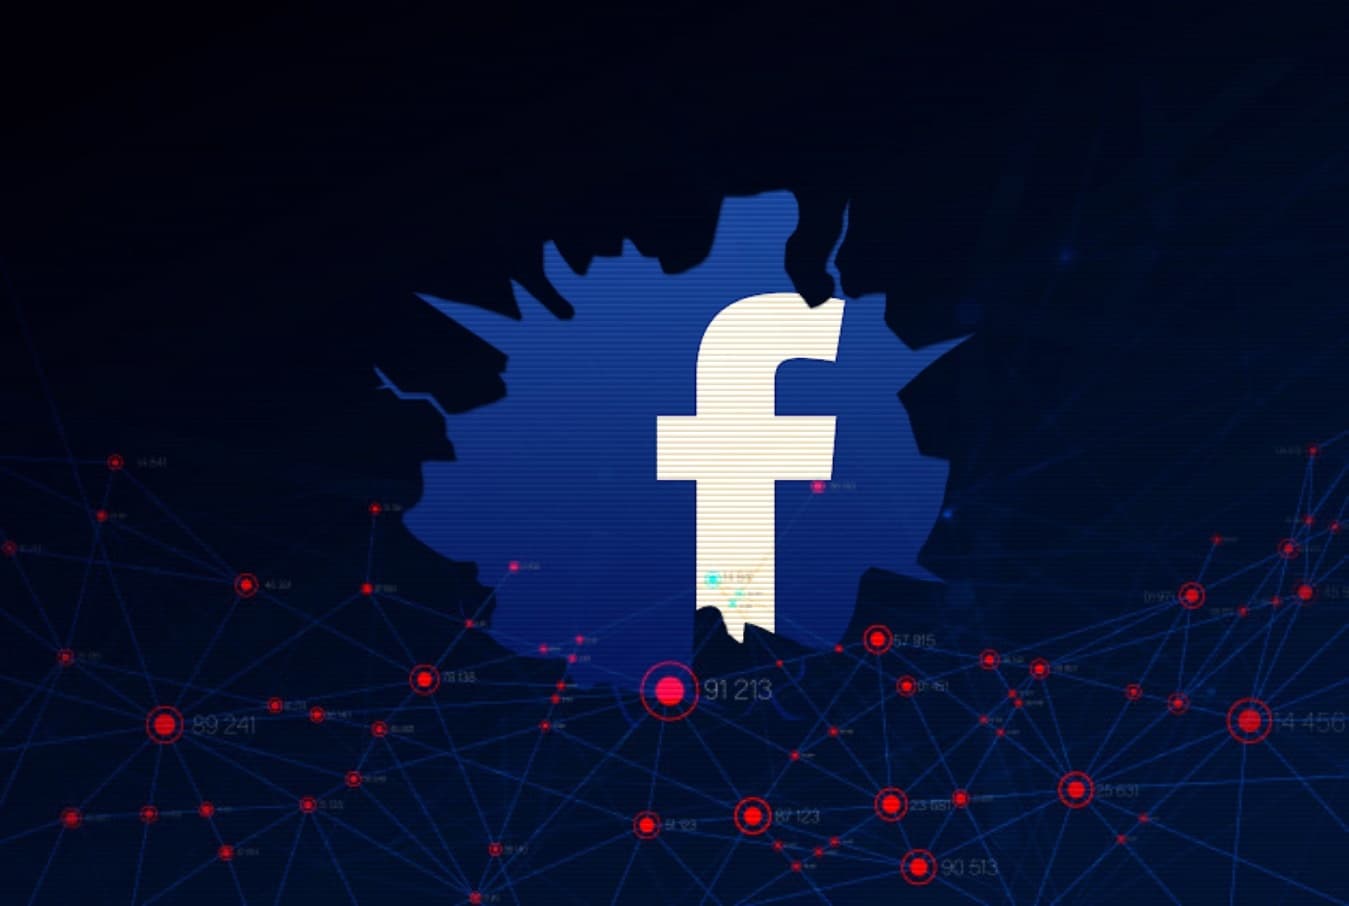 Researcher hacked Facebook by exploiting flaws in MobileIron MDM